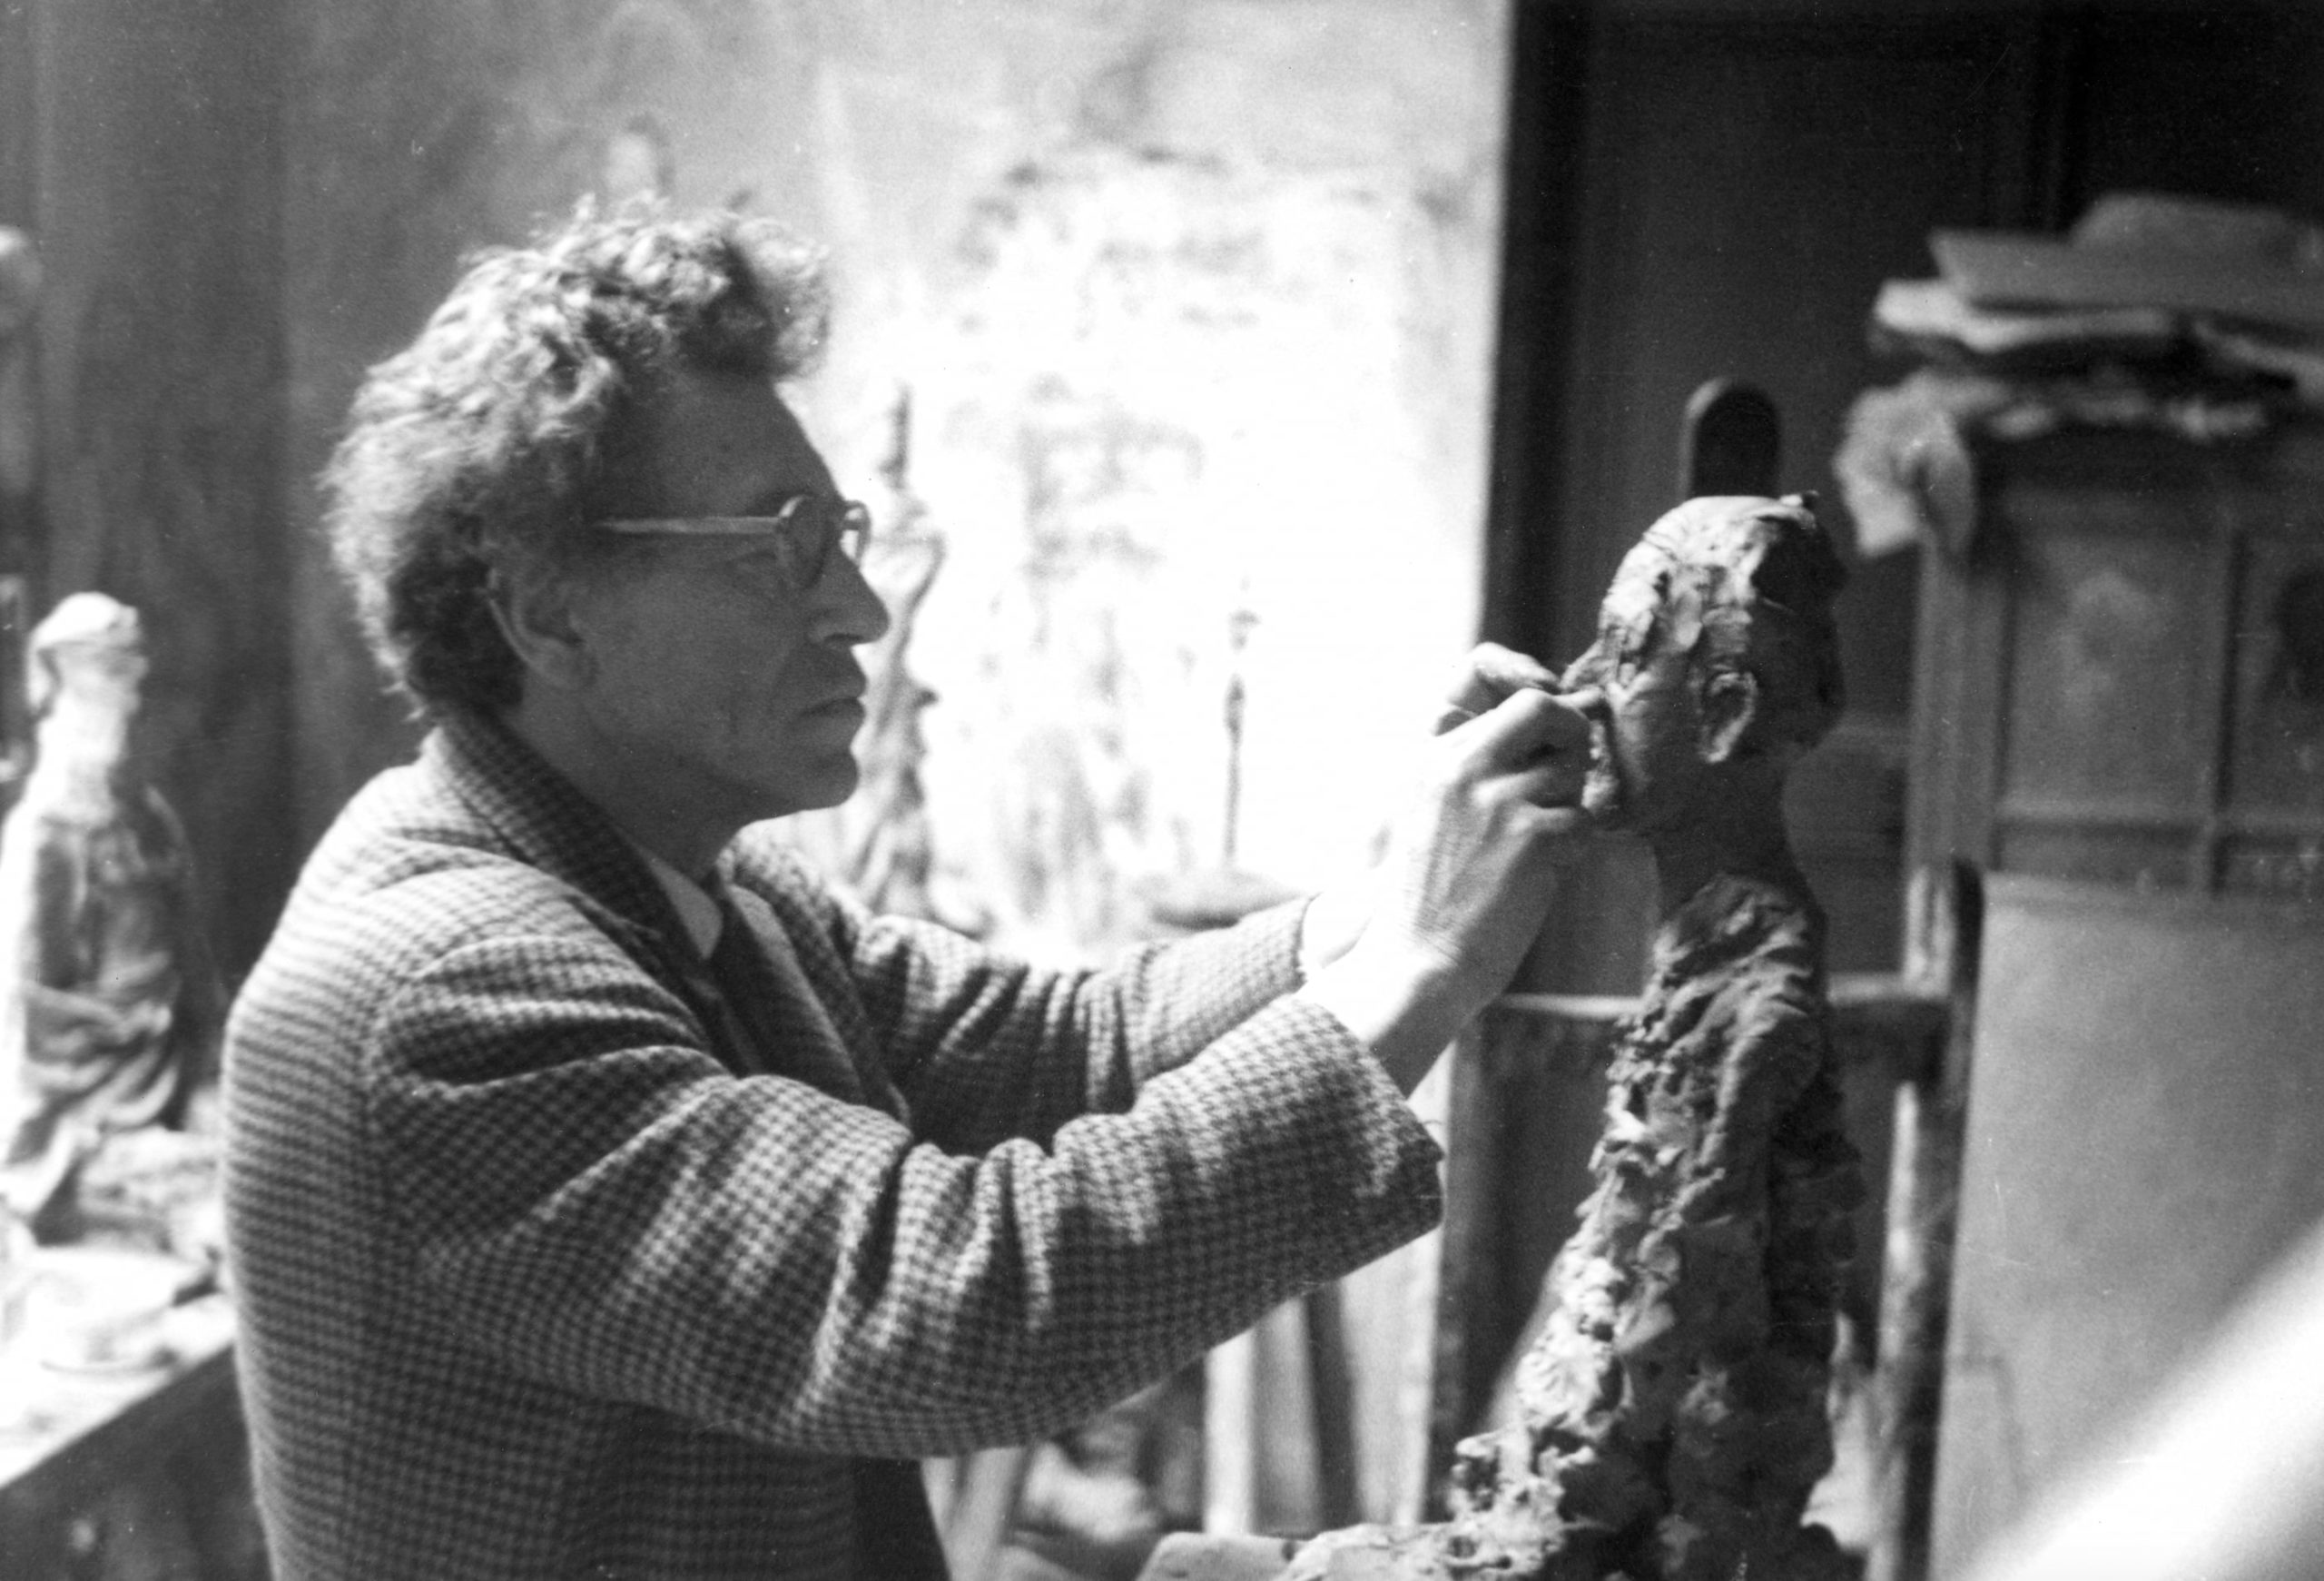 Sartre & Giacometti: words between friends